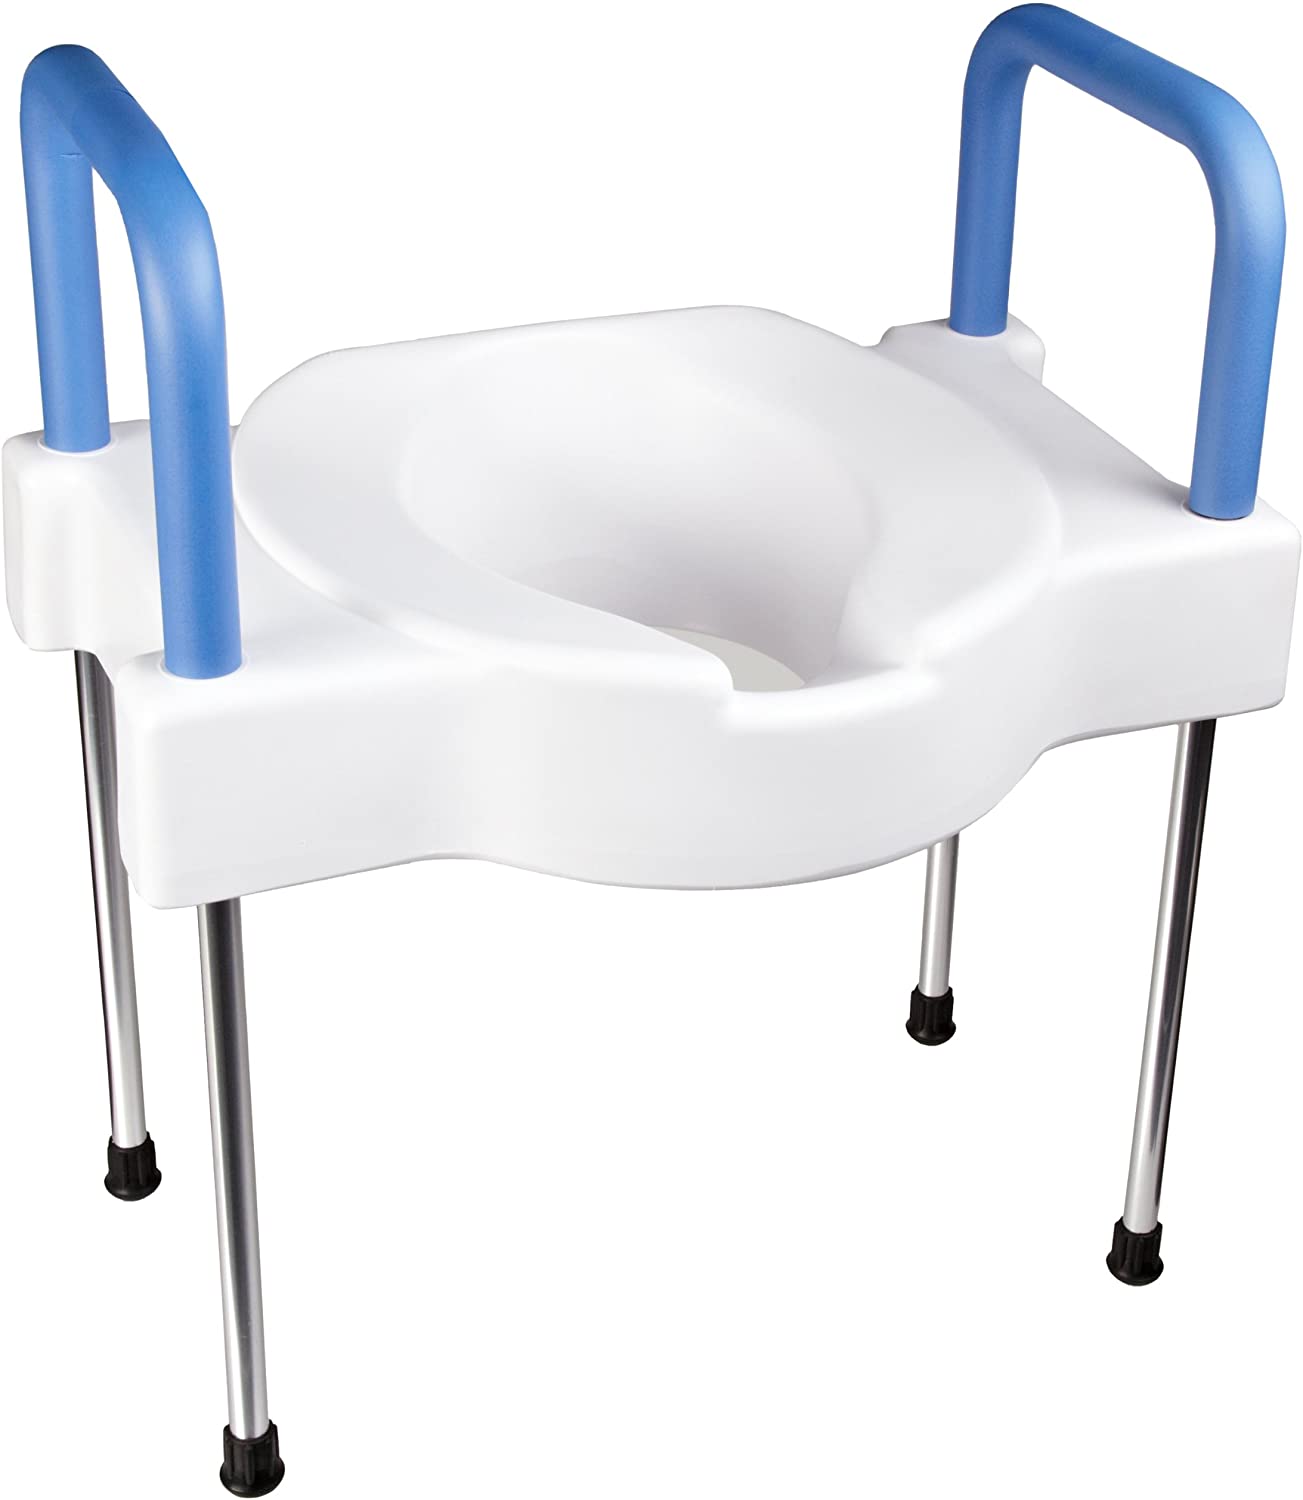 SP Ableware Maddak Toilet Seat Height Extender